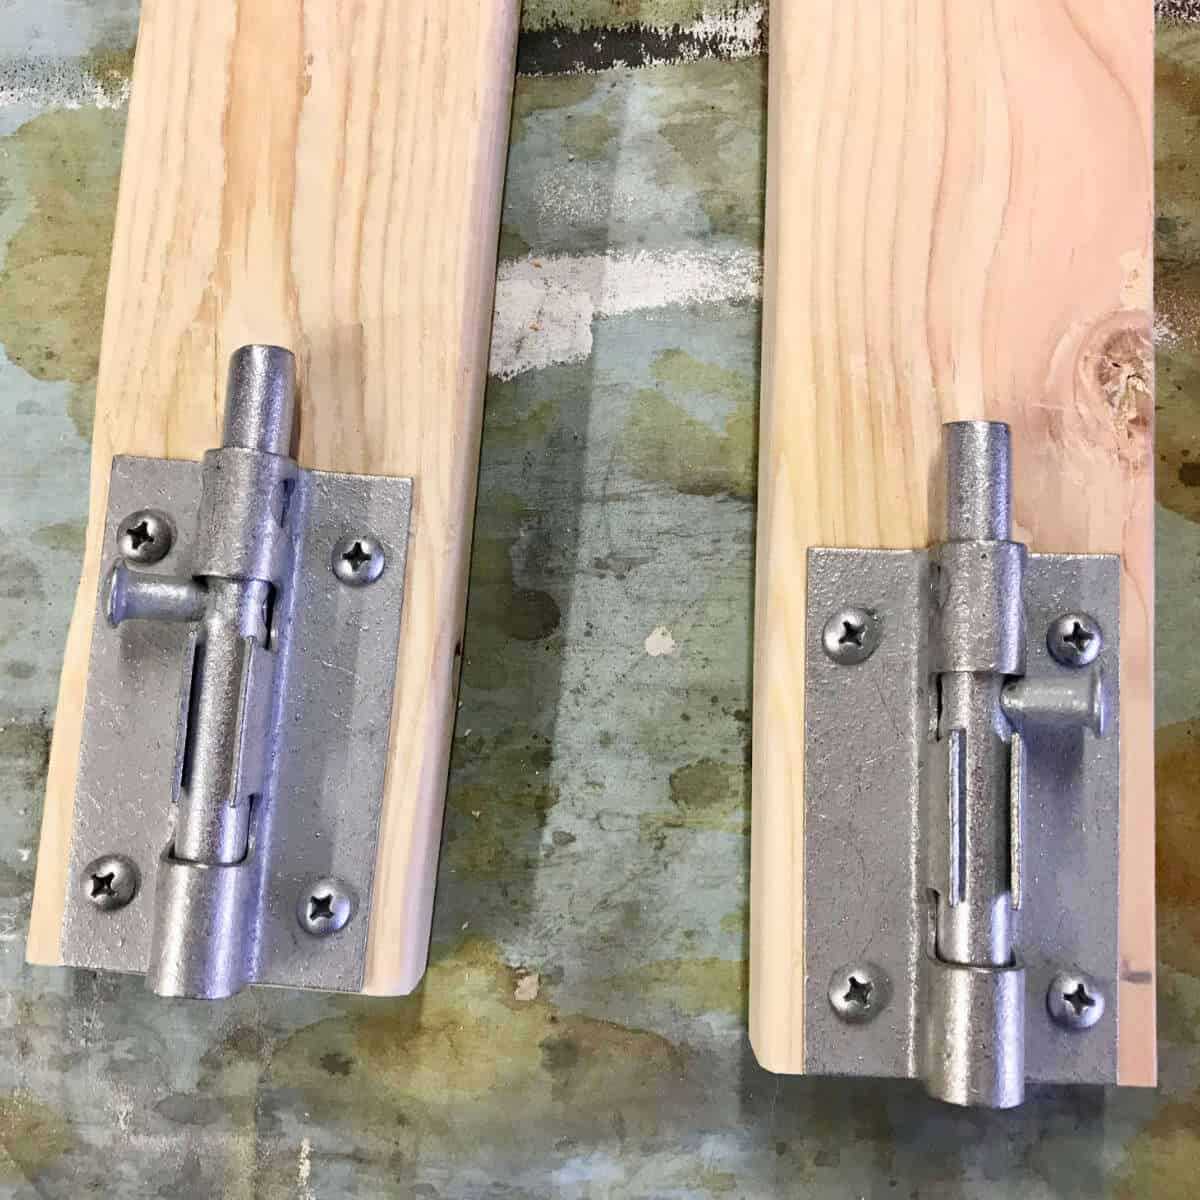 Barrel bolts on the ends of 2 x 4s.